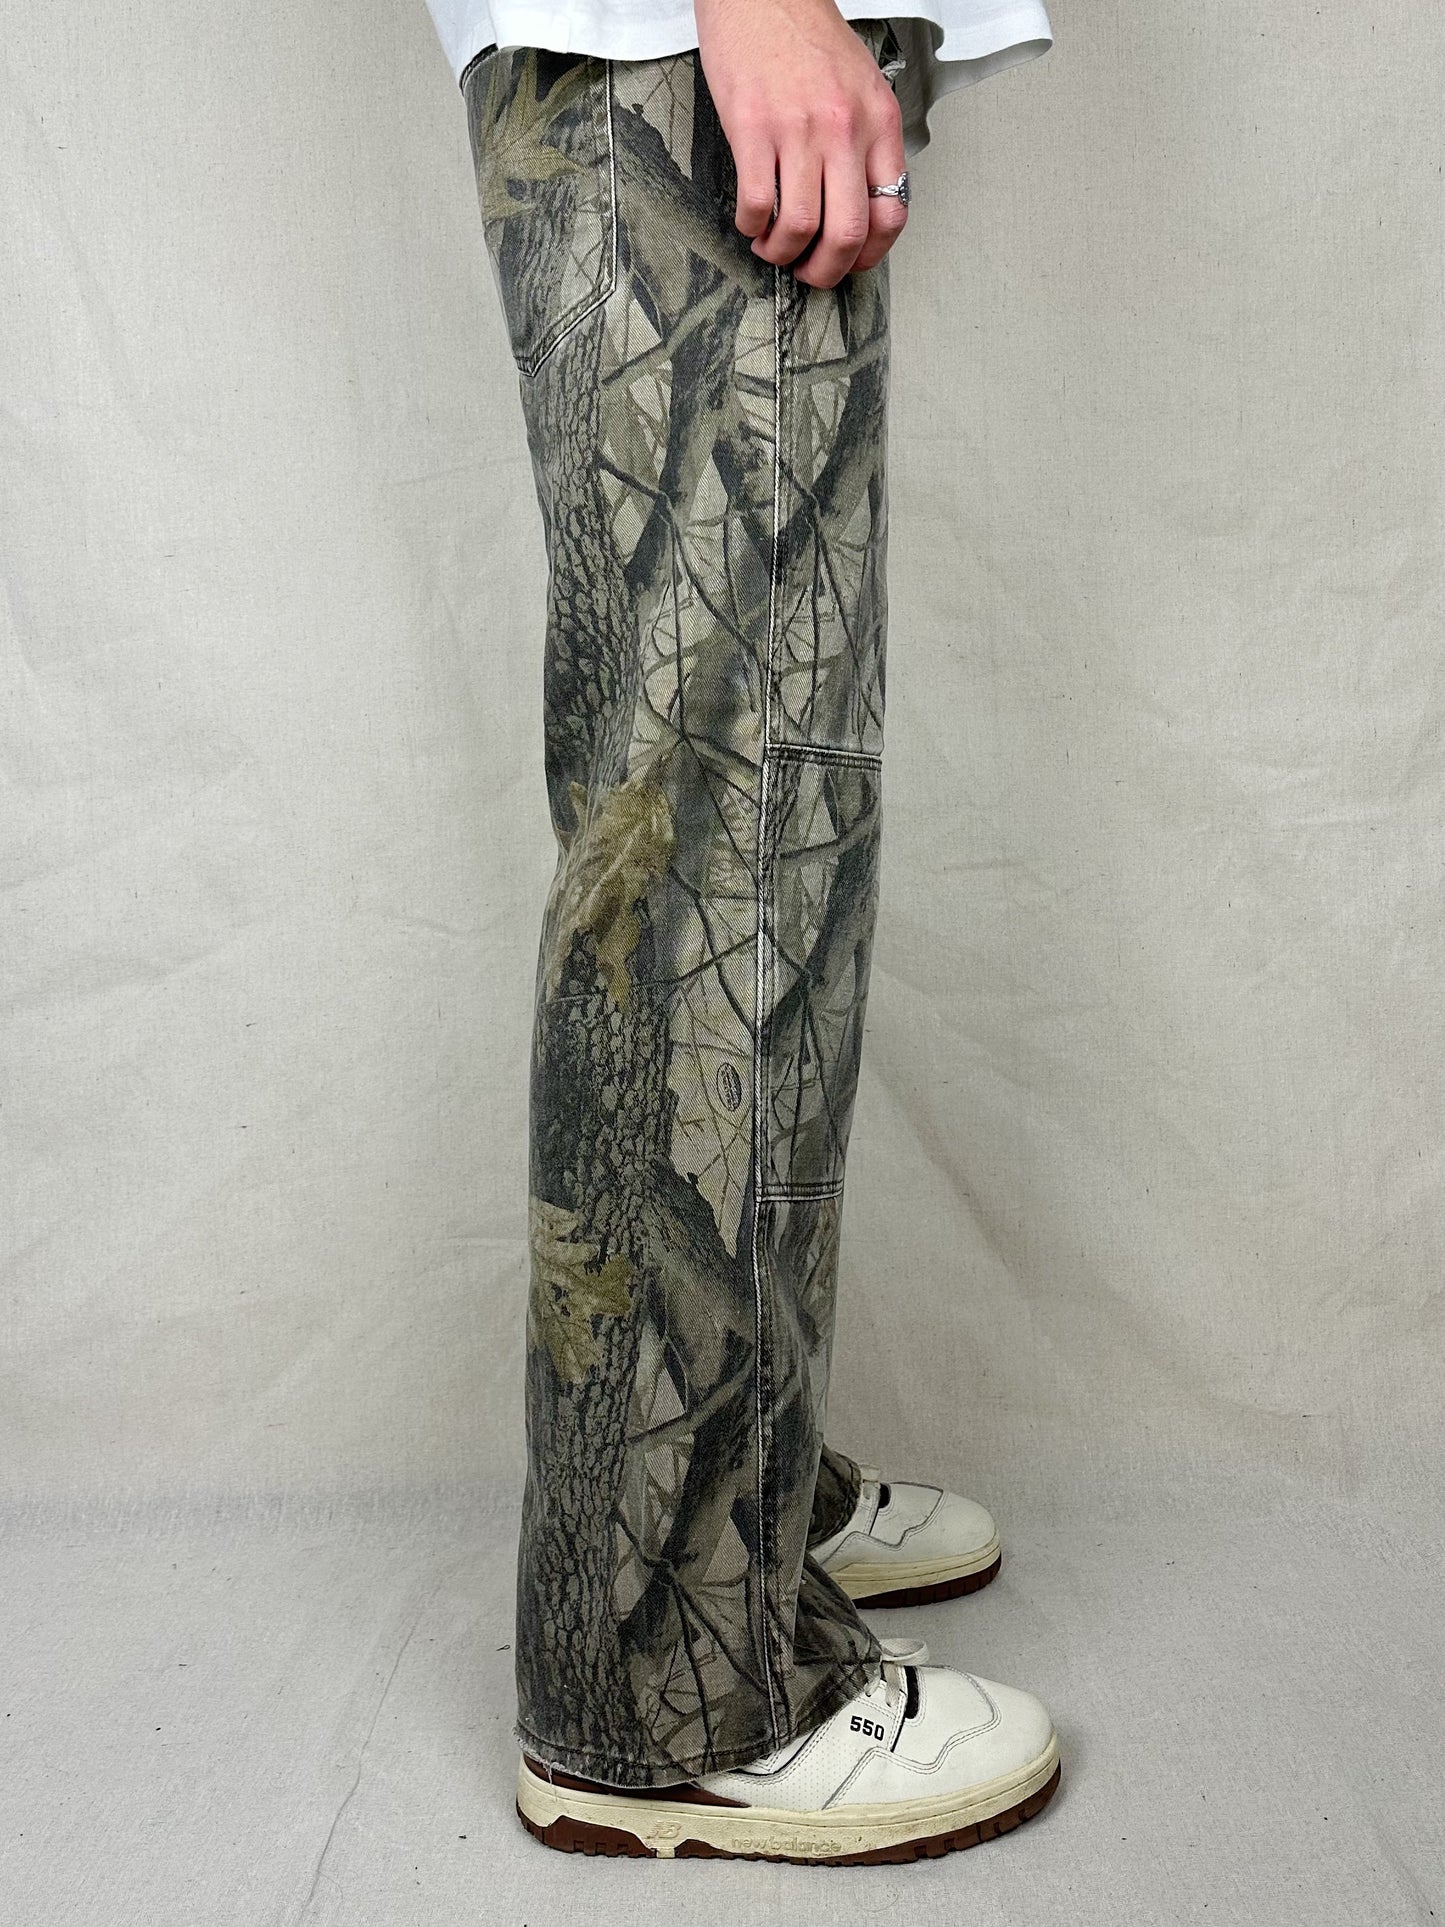 90's Realtree Camo Vintage Double Knee Jeans Size 31x30